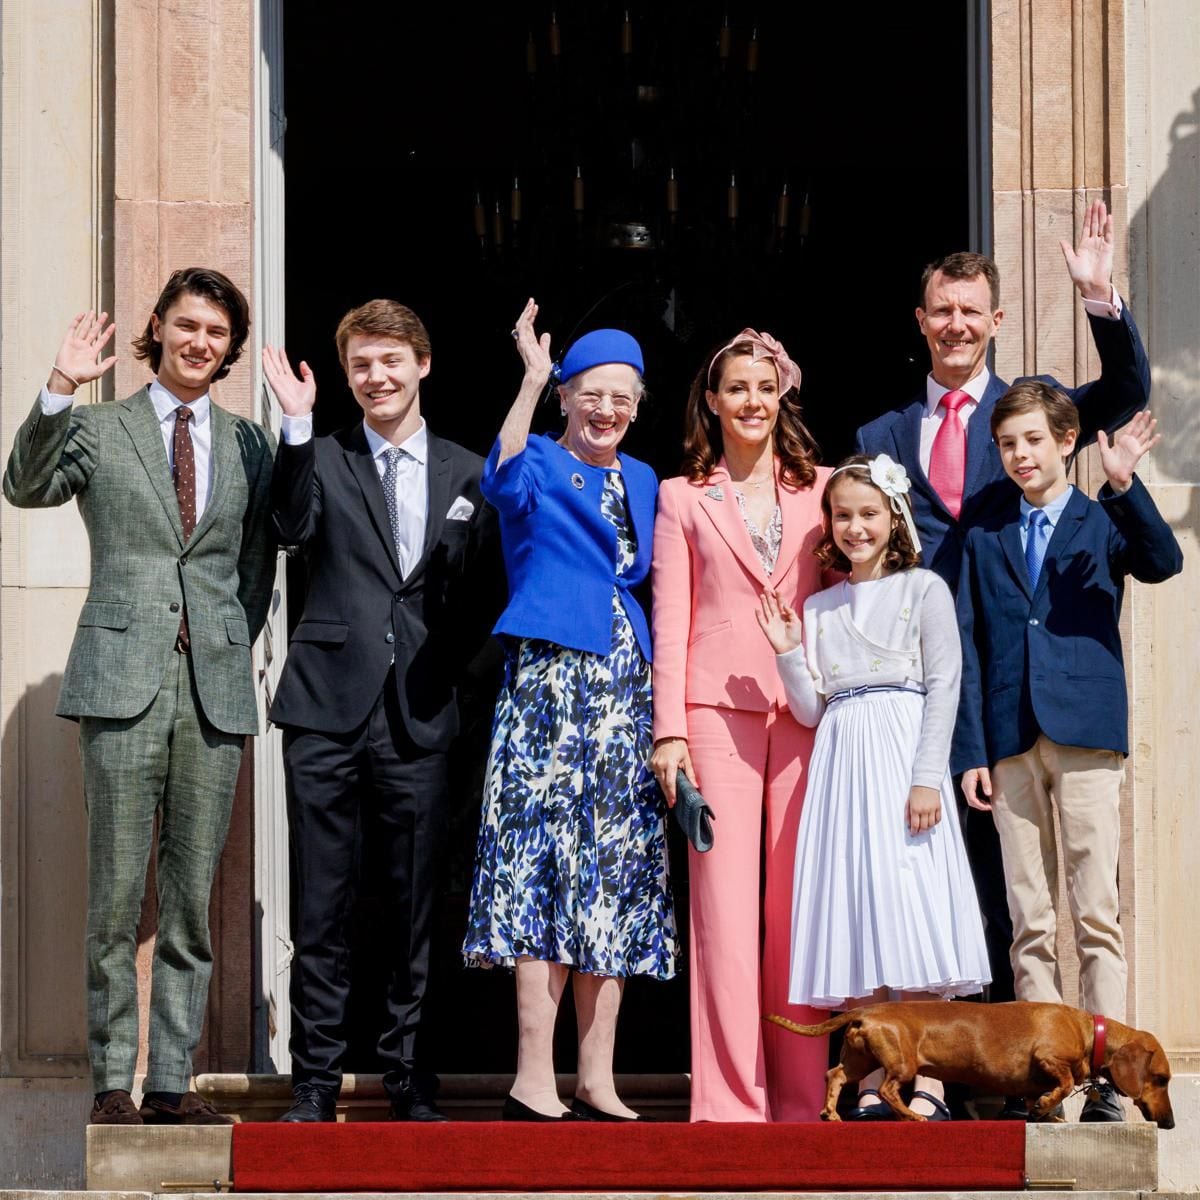  The Danish Queen has decided to remove Nikolai, Felix, Henrik and Athena’s titles of Prince and Princess